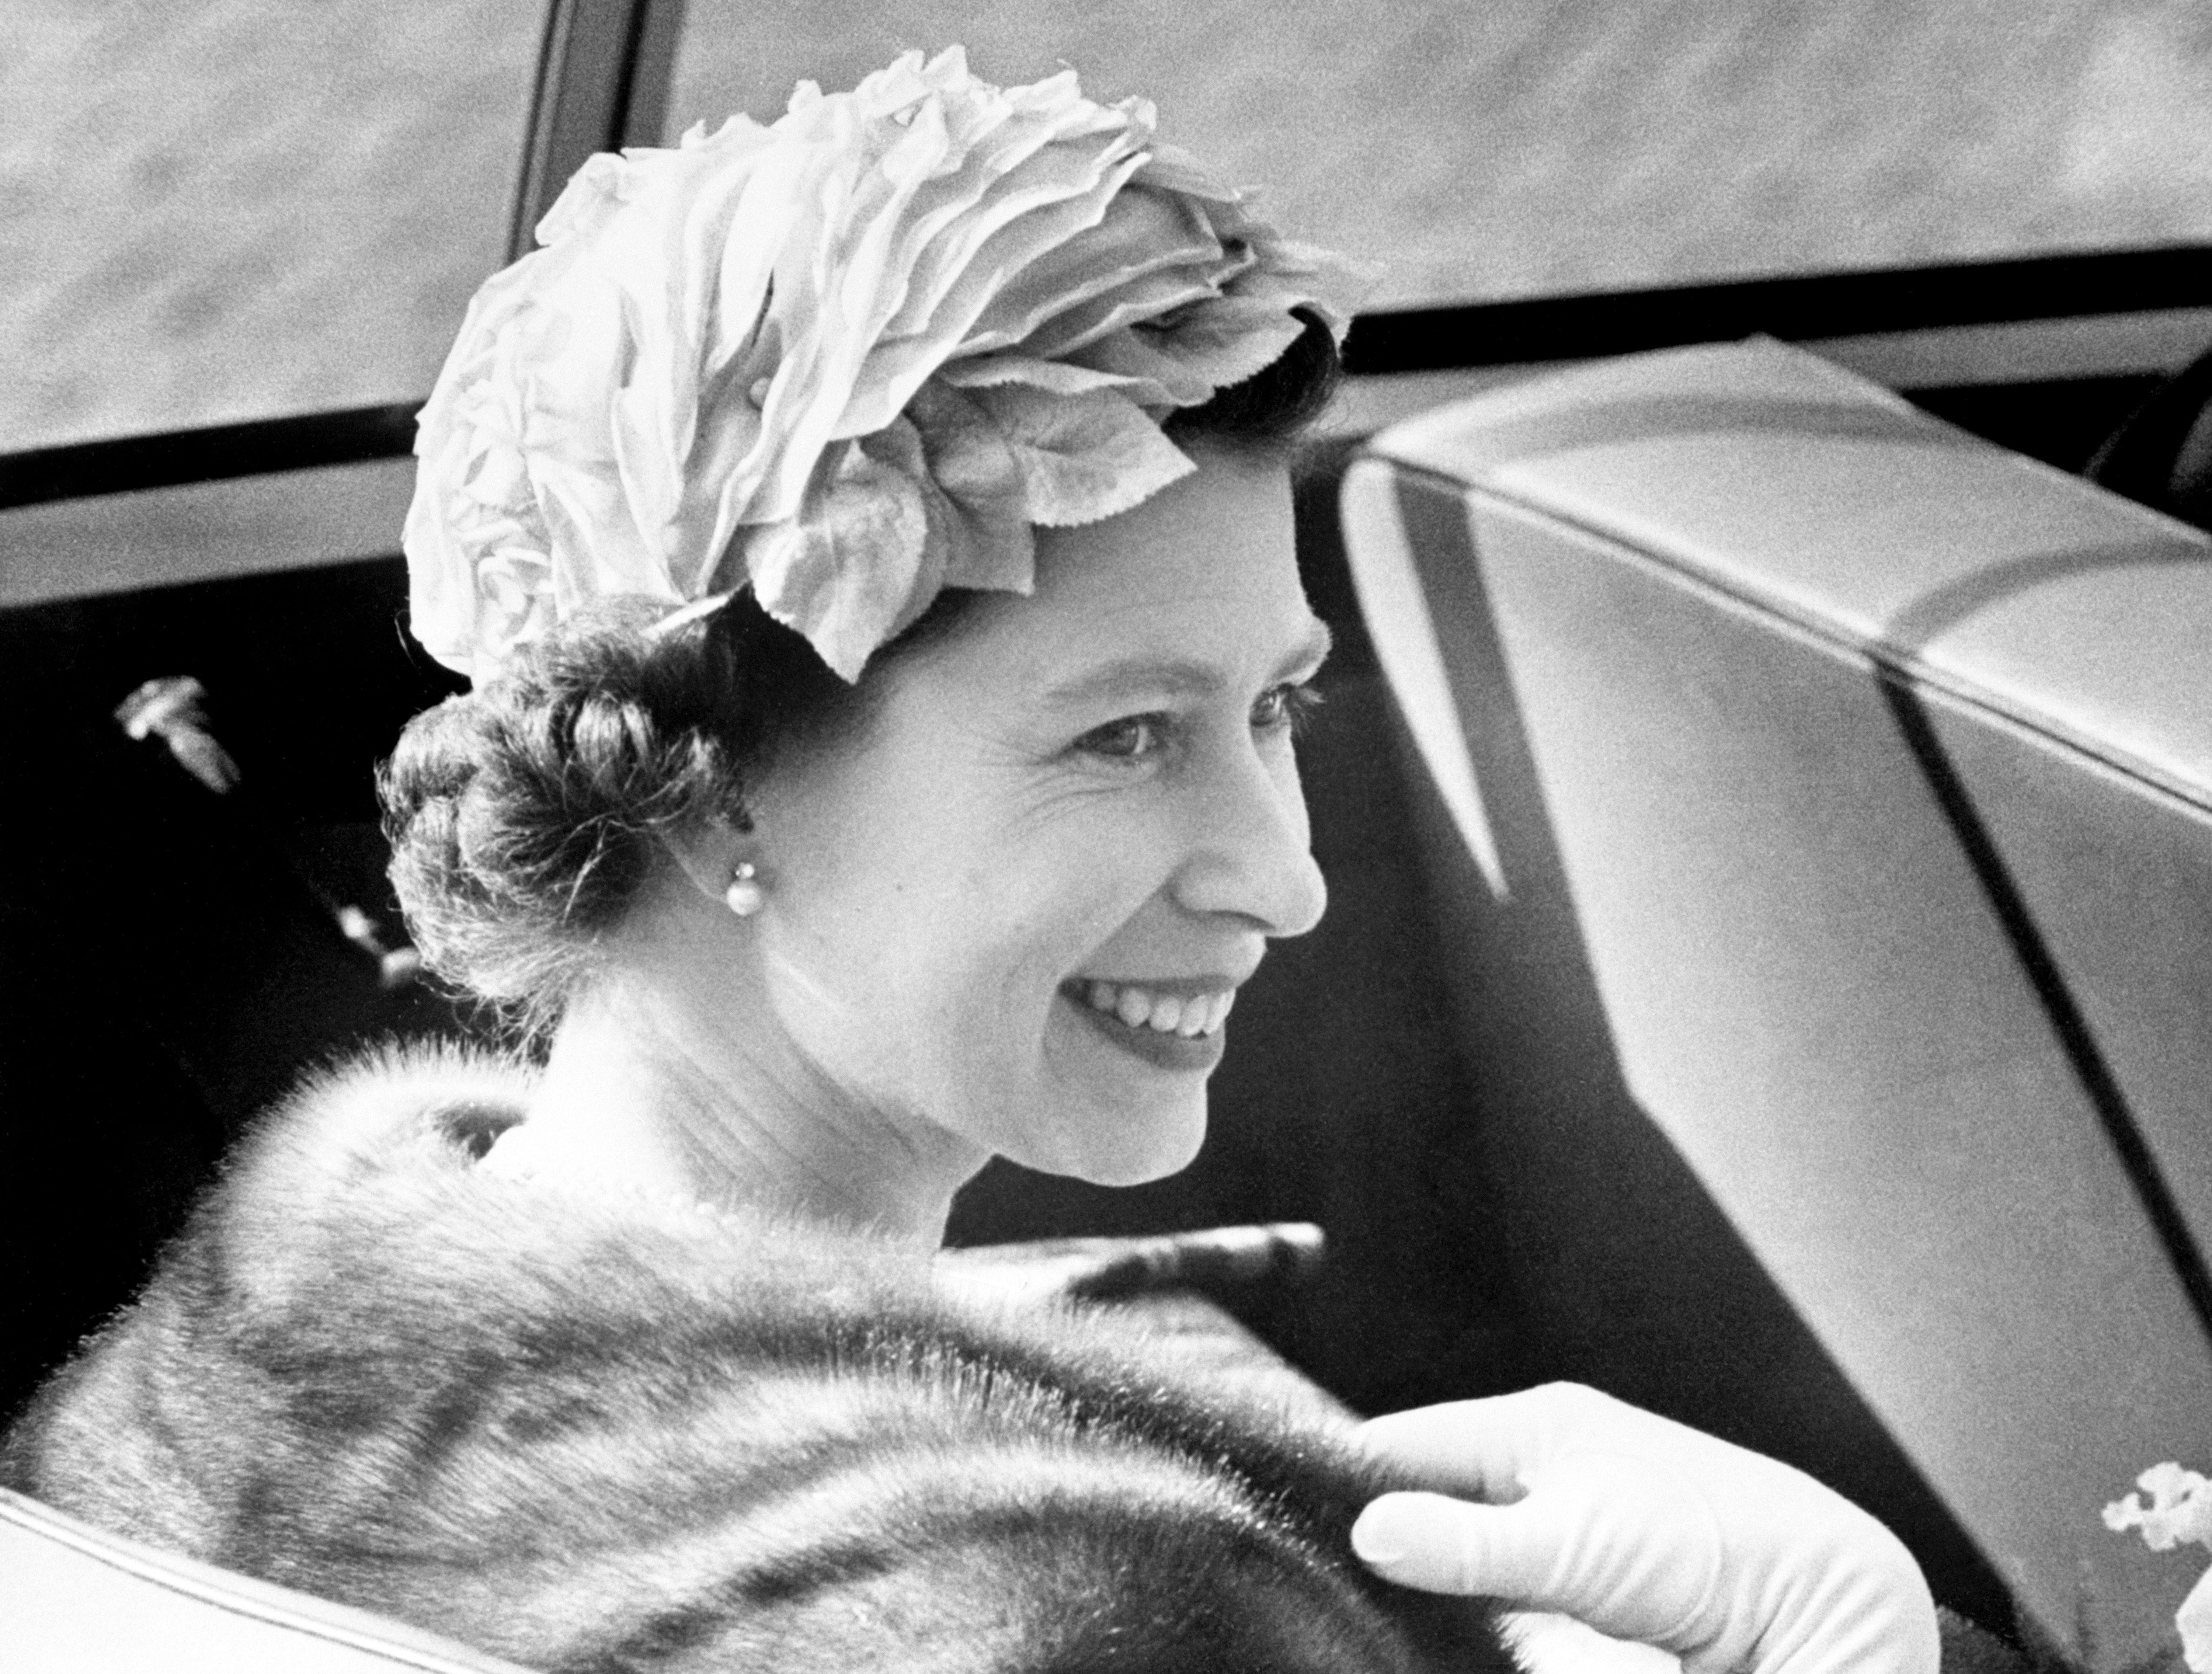 The Queen pictured in 1957, four years after her coronation